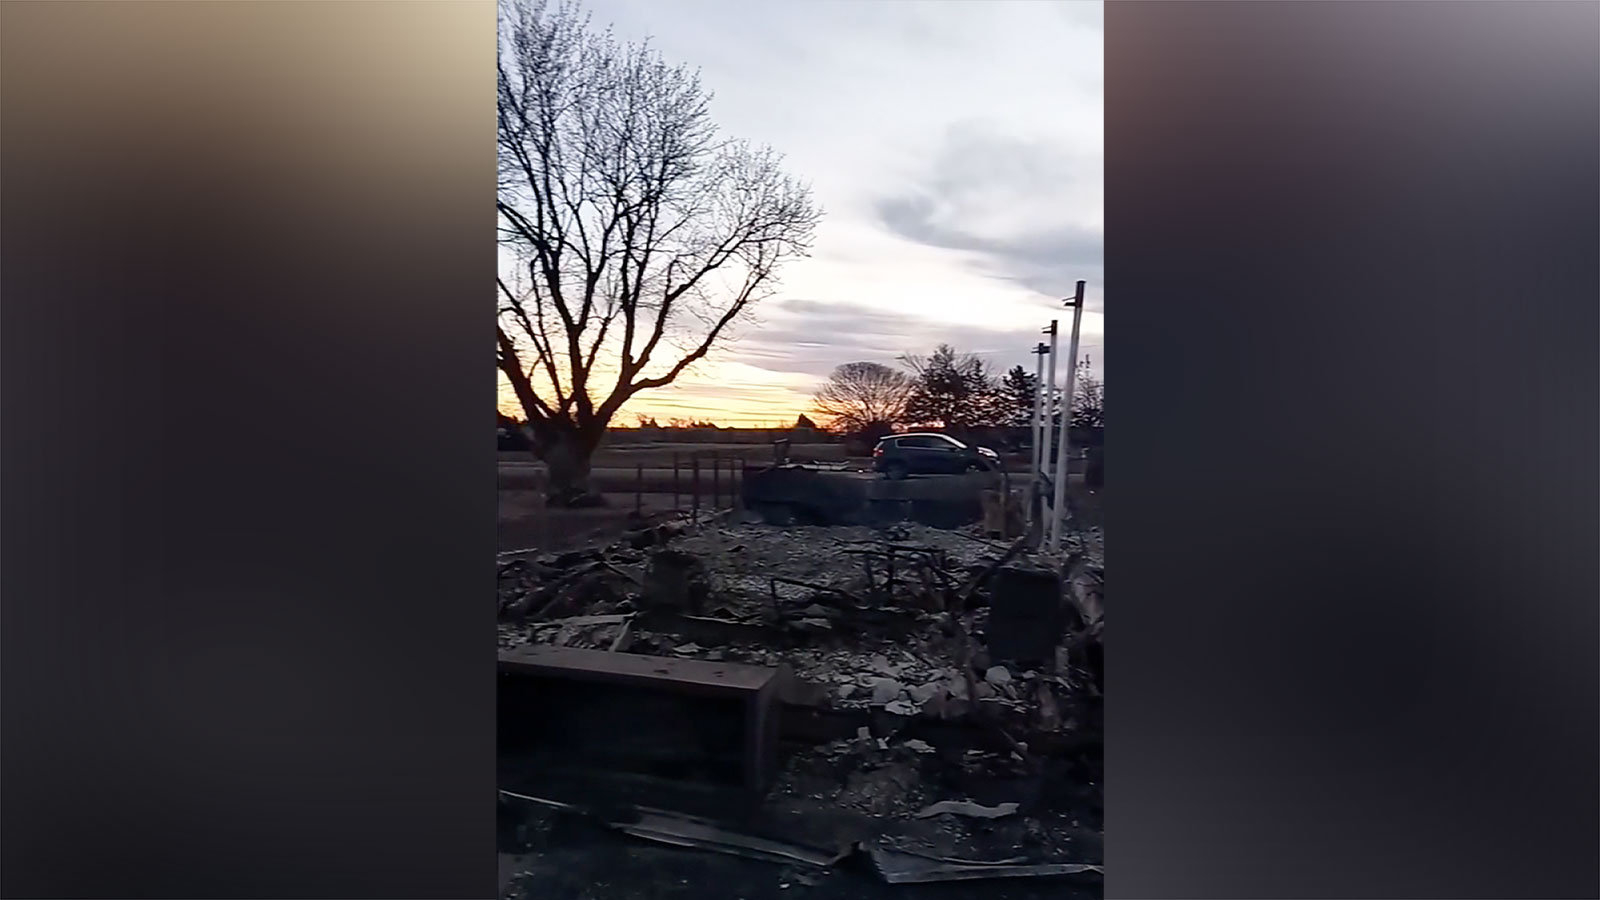 Frank Probst shared video of his destroyed home in Fritch, Texas.